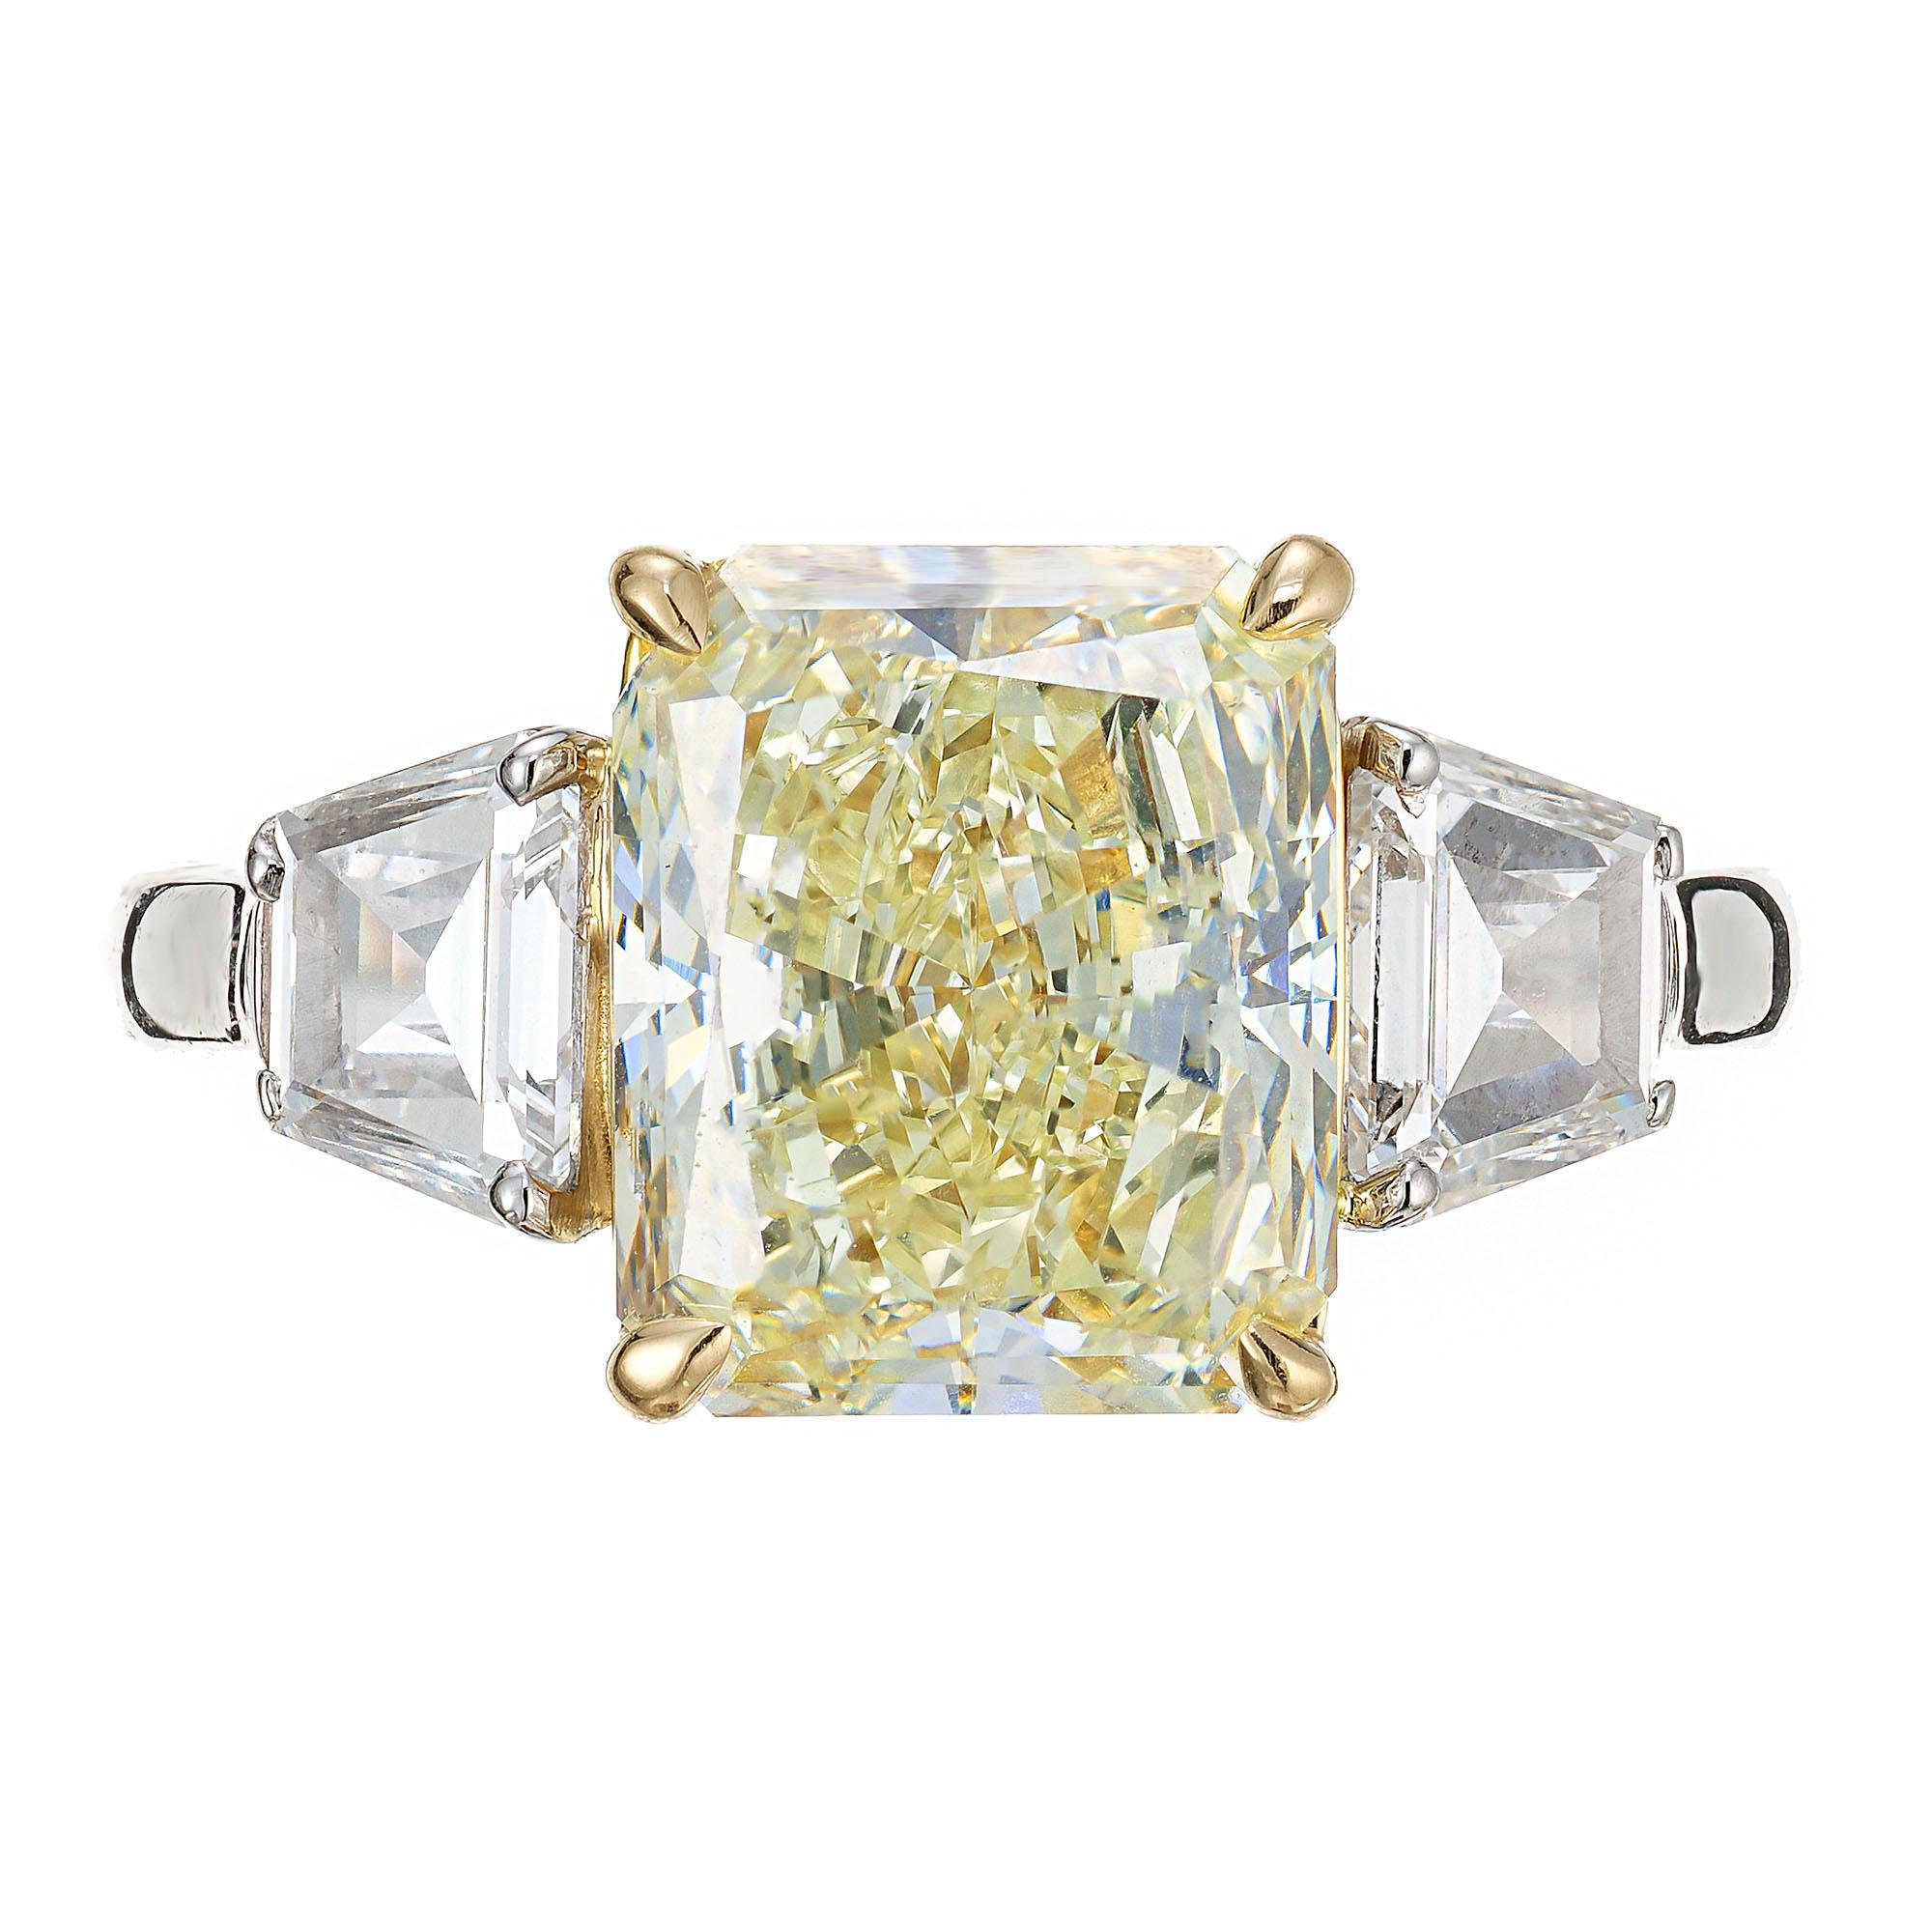 Yellow and white diamond engagement ring. GIA and EGL certified Light yellow natural cushion and radiant cut diamond center stone, set in platinum with 2 trapezoid cut side diamonds. 18k yellow gold four prong crown. Graded by the EGL as light